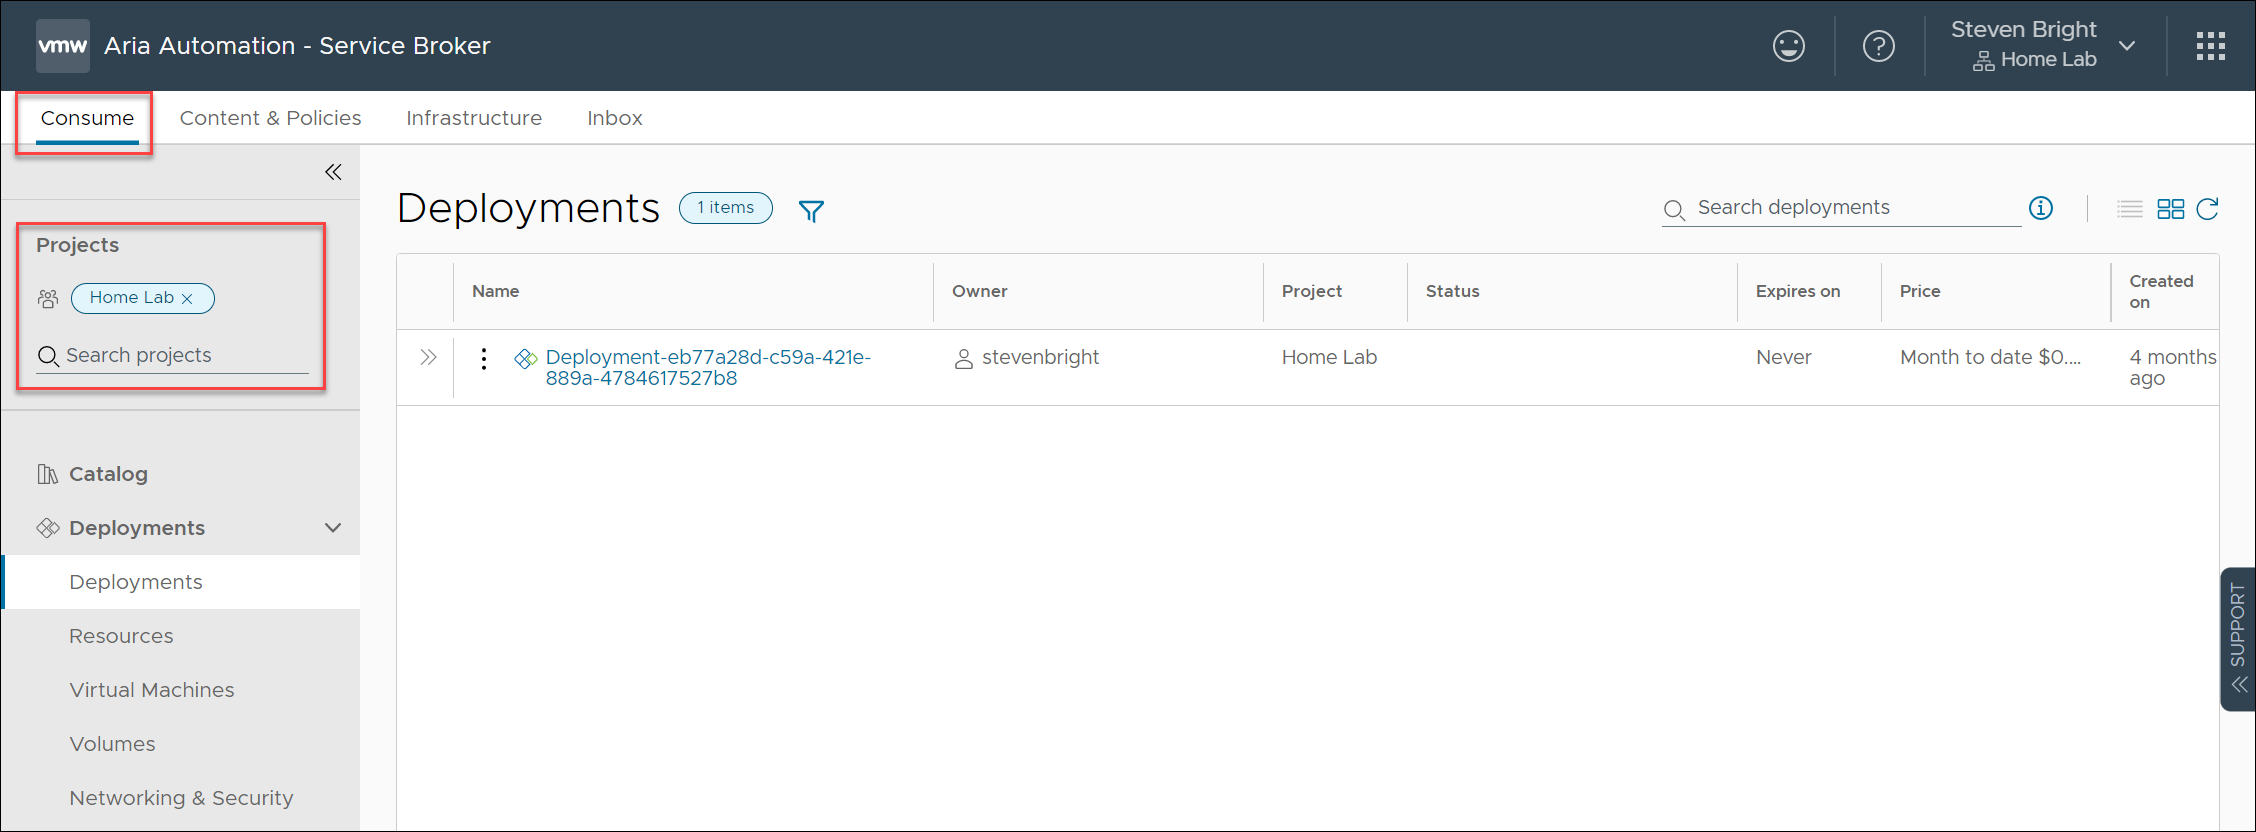 Screenshot of the new project filter within the new Consume tab in Aria Automation Service Broker